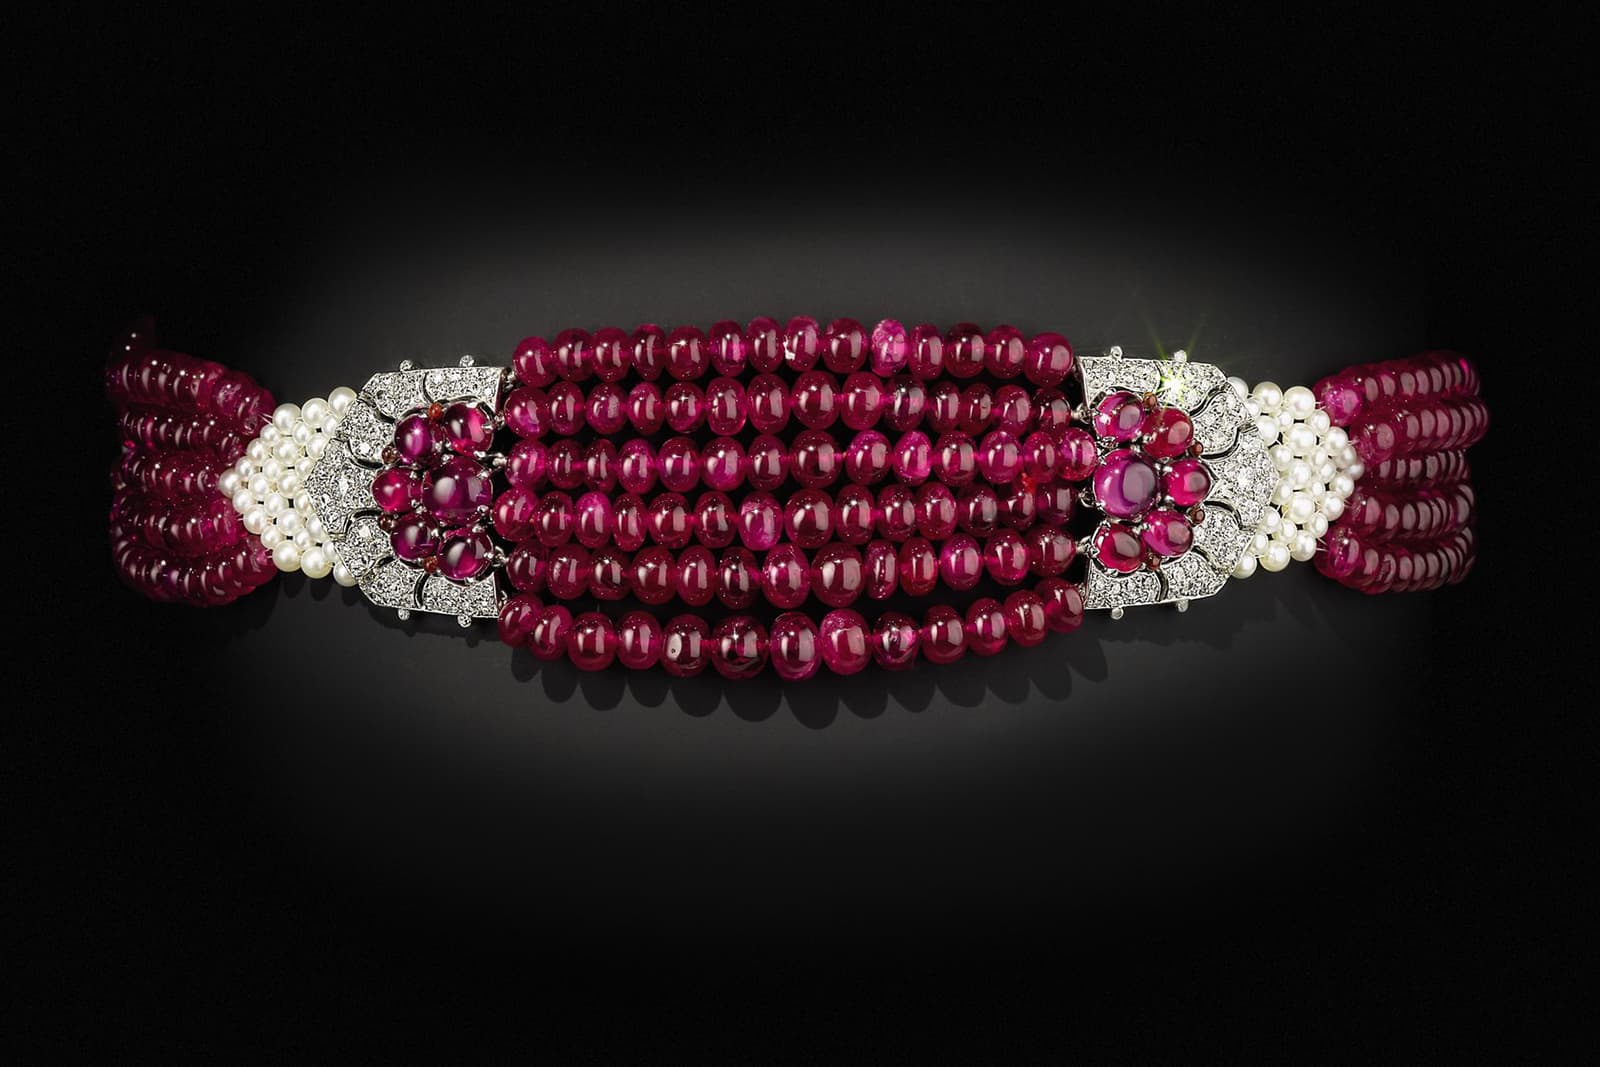 The Art Deco Patiala ruby choker made by Cartier for Maharani Yagoda Devi, one of the Maharaja's wives, in 1931